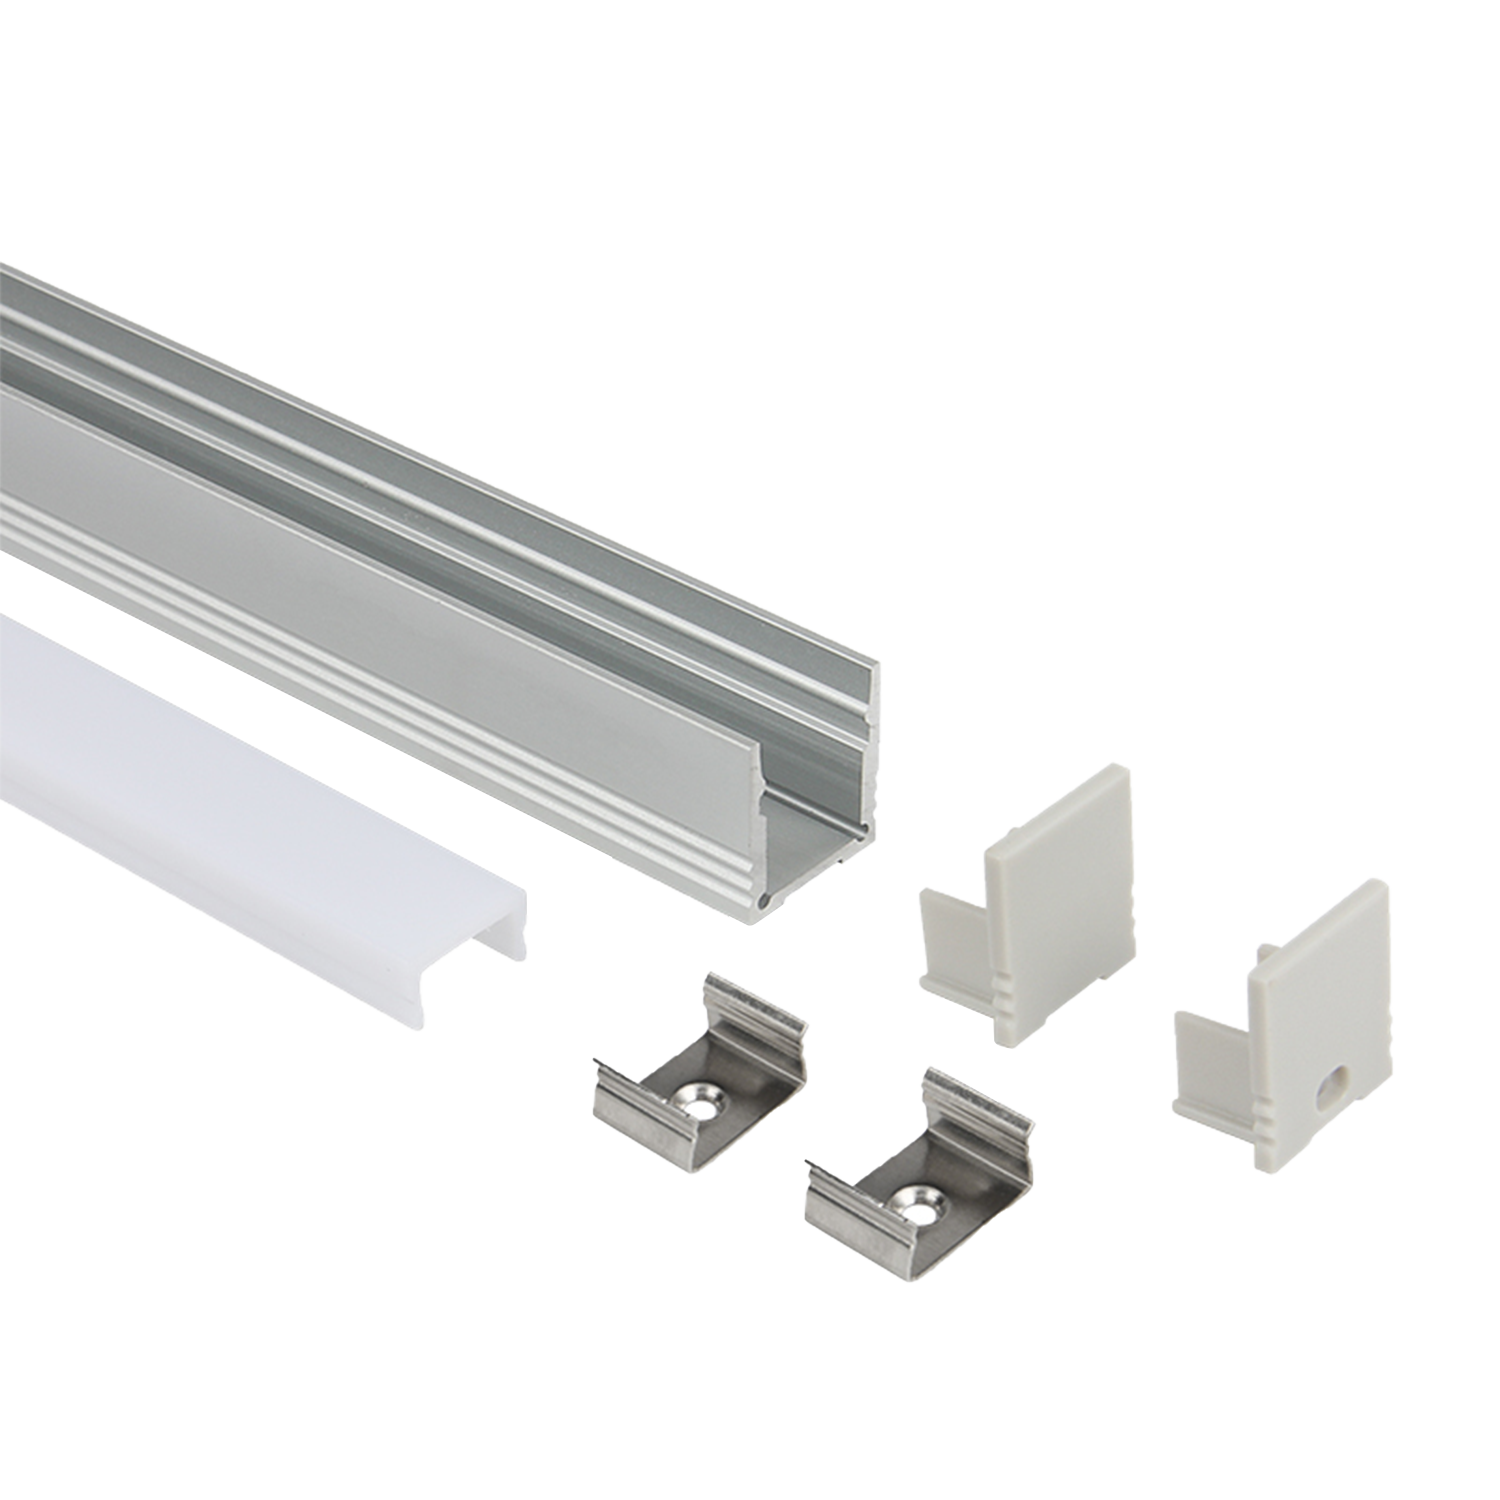 2m Long Surface Mounted Aluminium LED Profile With Cover & End